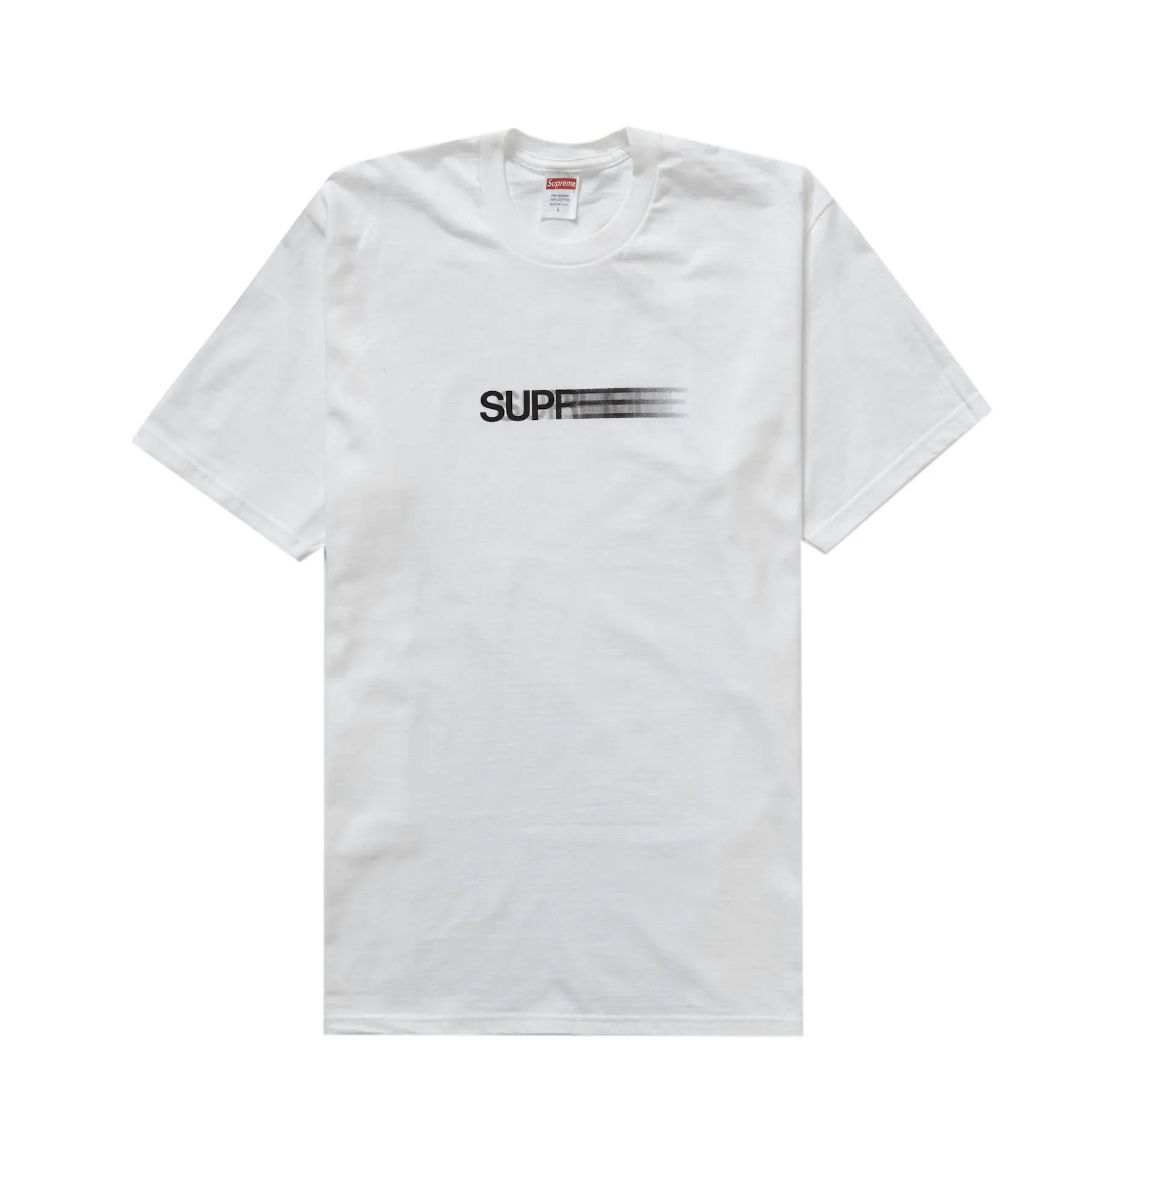 SUPREME Motion Logo Tshirts, Sizes S/M, White/Grey for Sale in